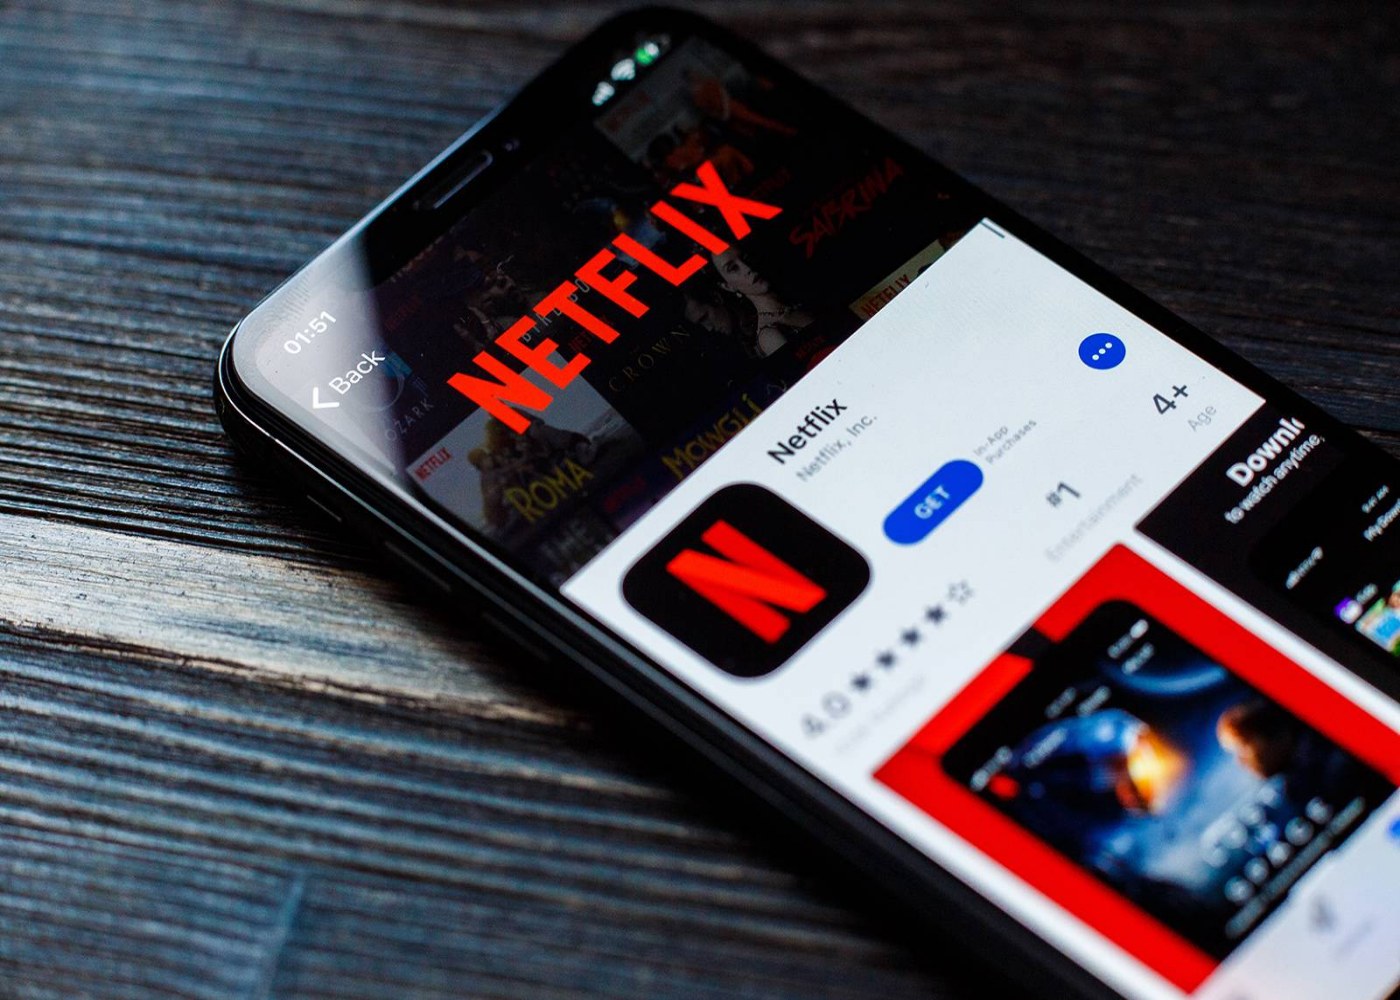 How to use Netflix for free in the UAE